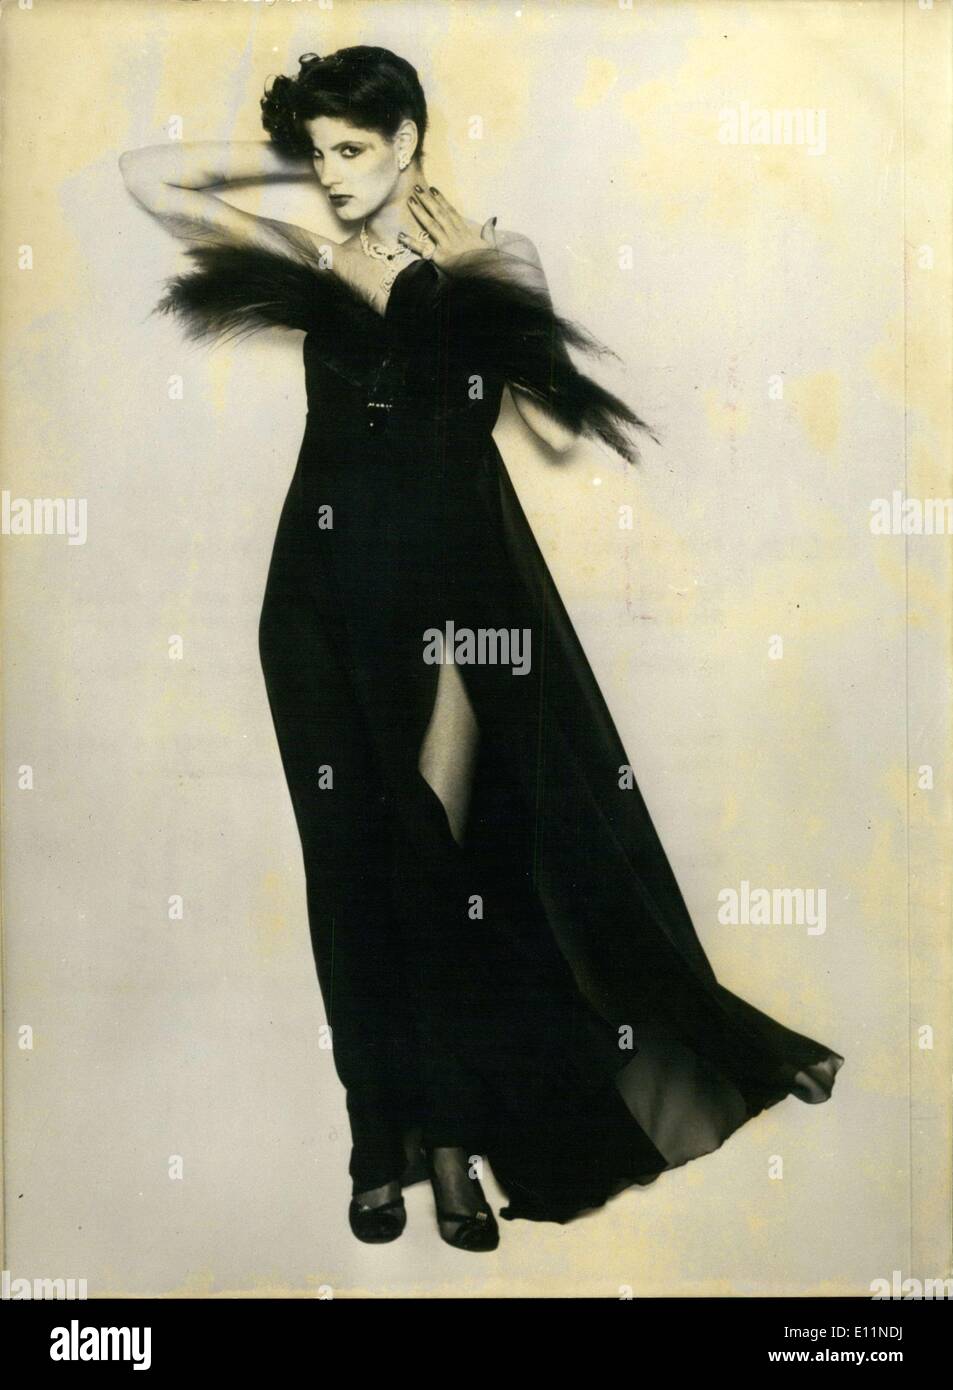 Jul. 02, 1979 - For fall and winter evenings, Kimijima's luxurious ready-to-wear clothes are straight out of Paris. Here is a muslin evening gown in soft black with a high slit in the front, adorned with feathers from birds of paradise along the neckline. Stock Photo